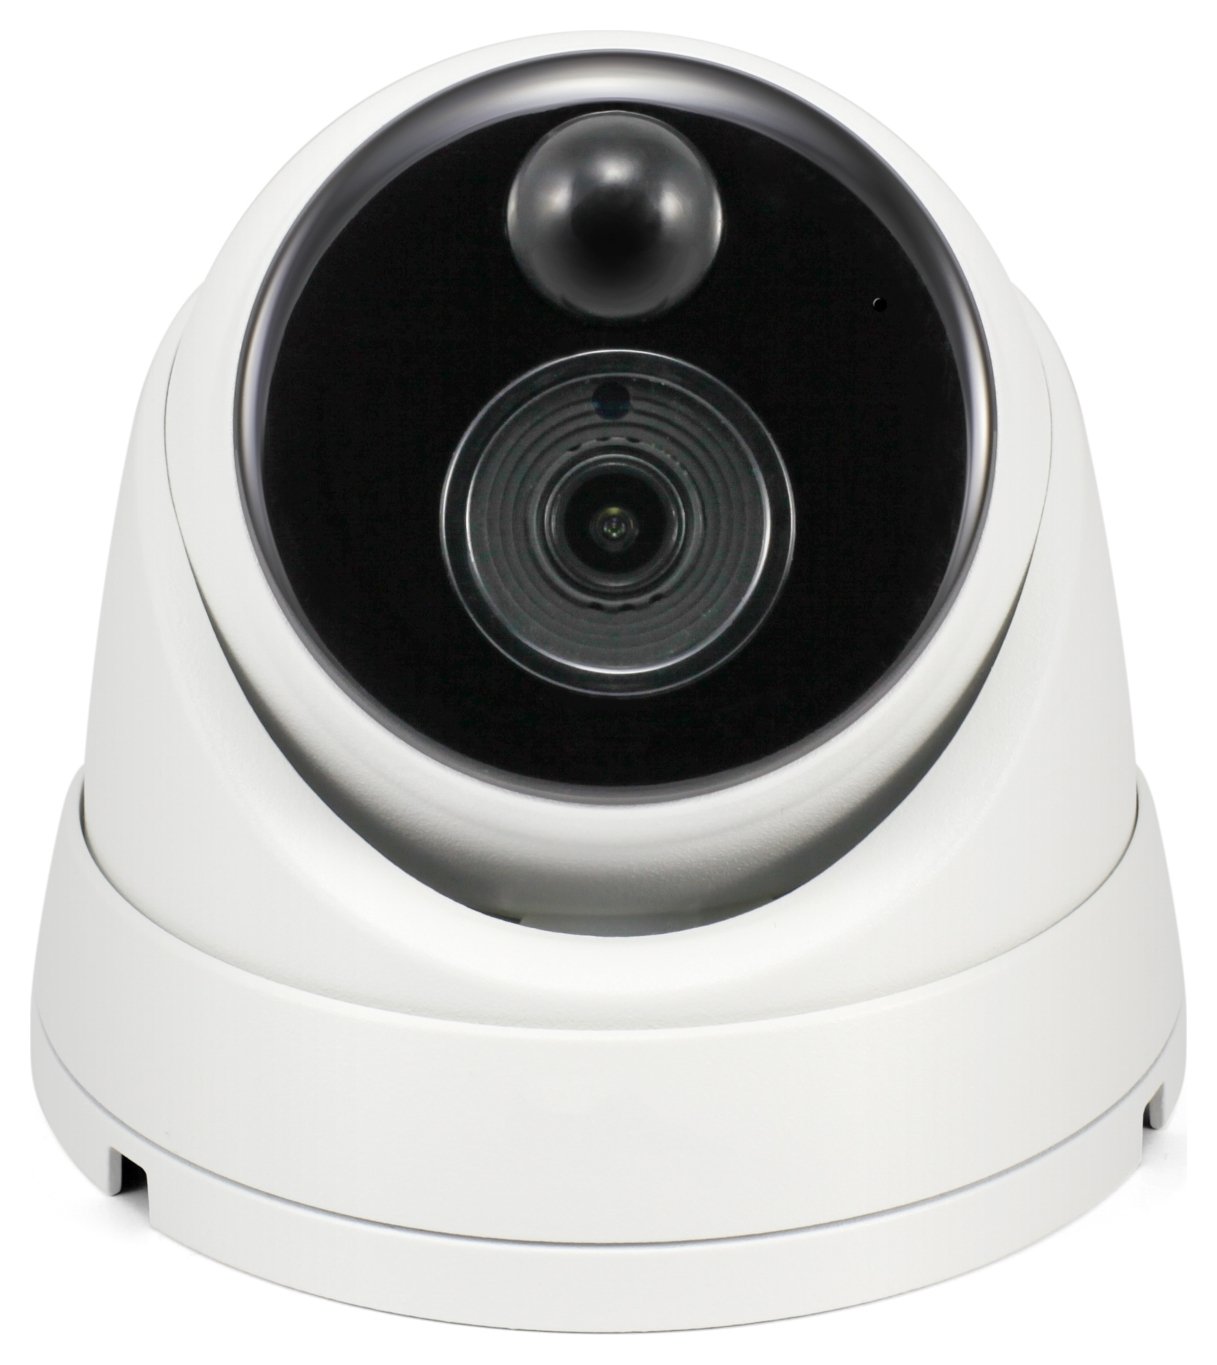 Swann 4K Ultra HD Security Camera with Audio - White